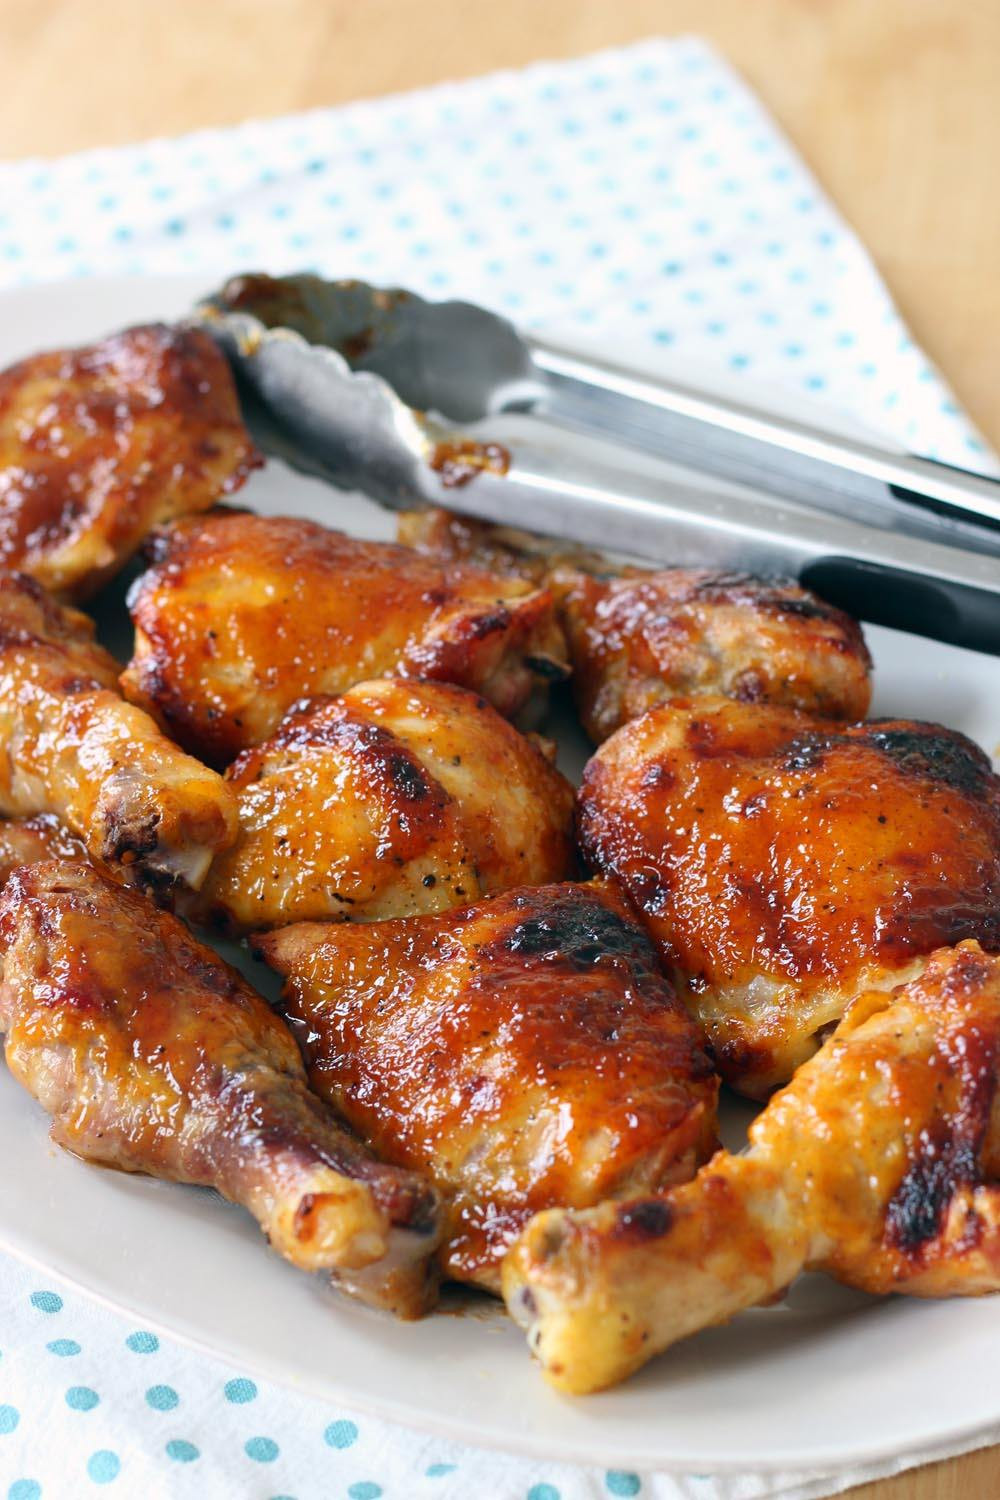 Bbq Baked Chicken
 20 Chicken Recipes To Make Every Meal Healthy And Fulfilling